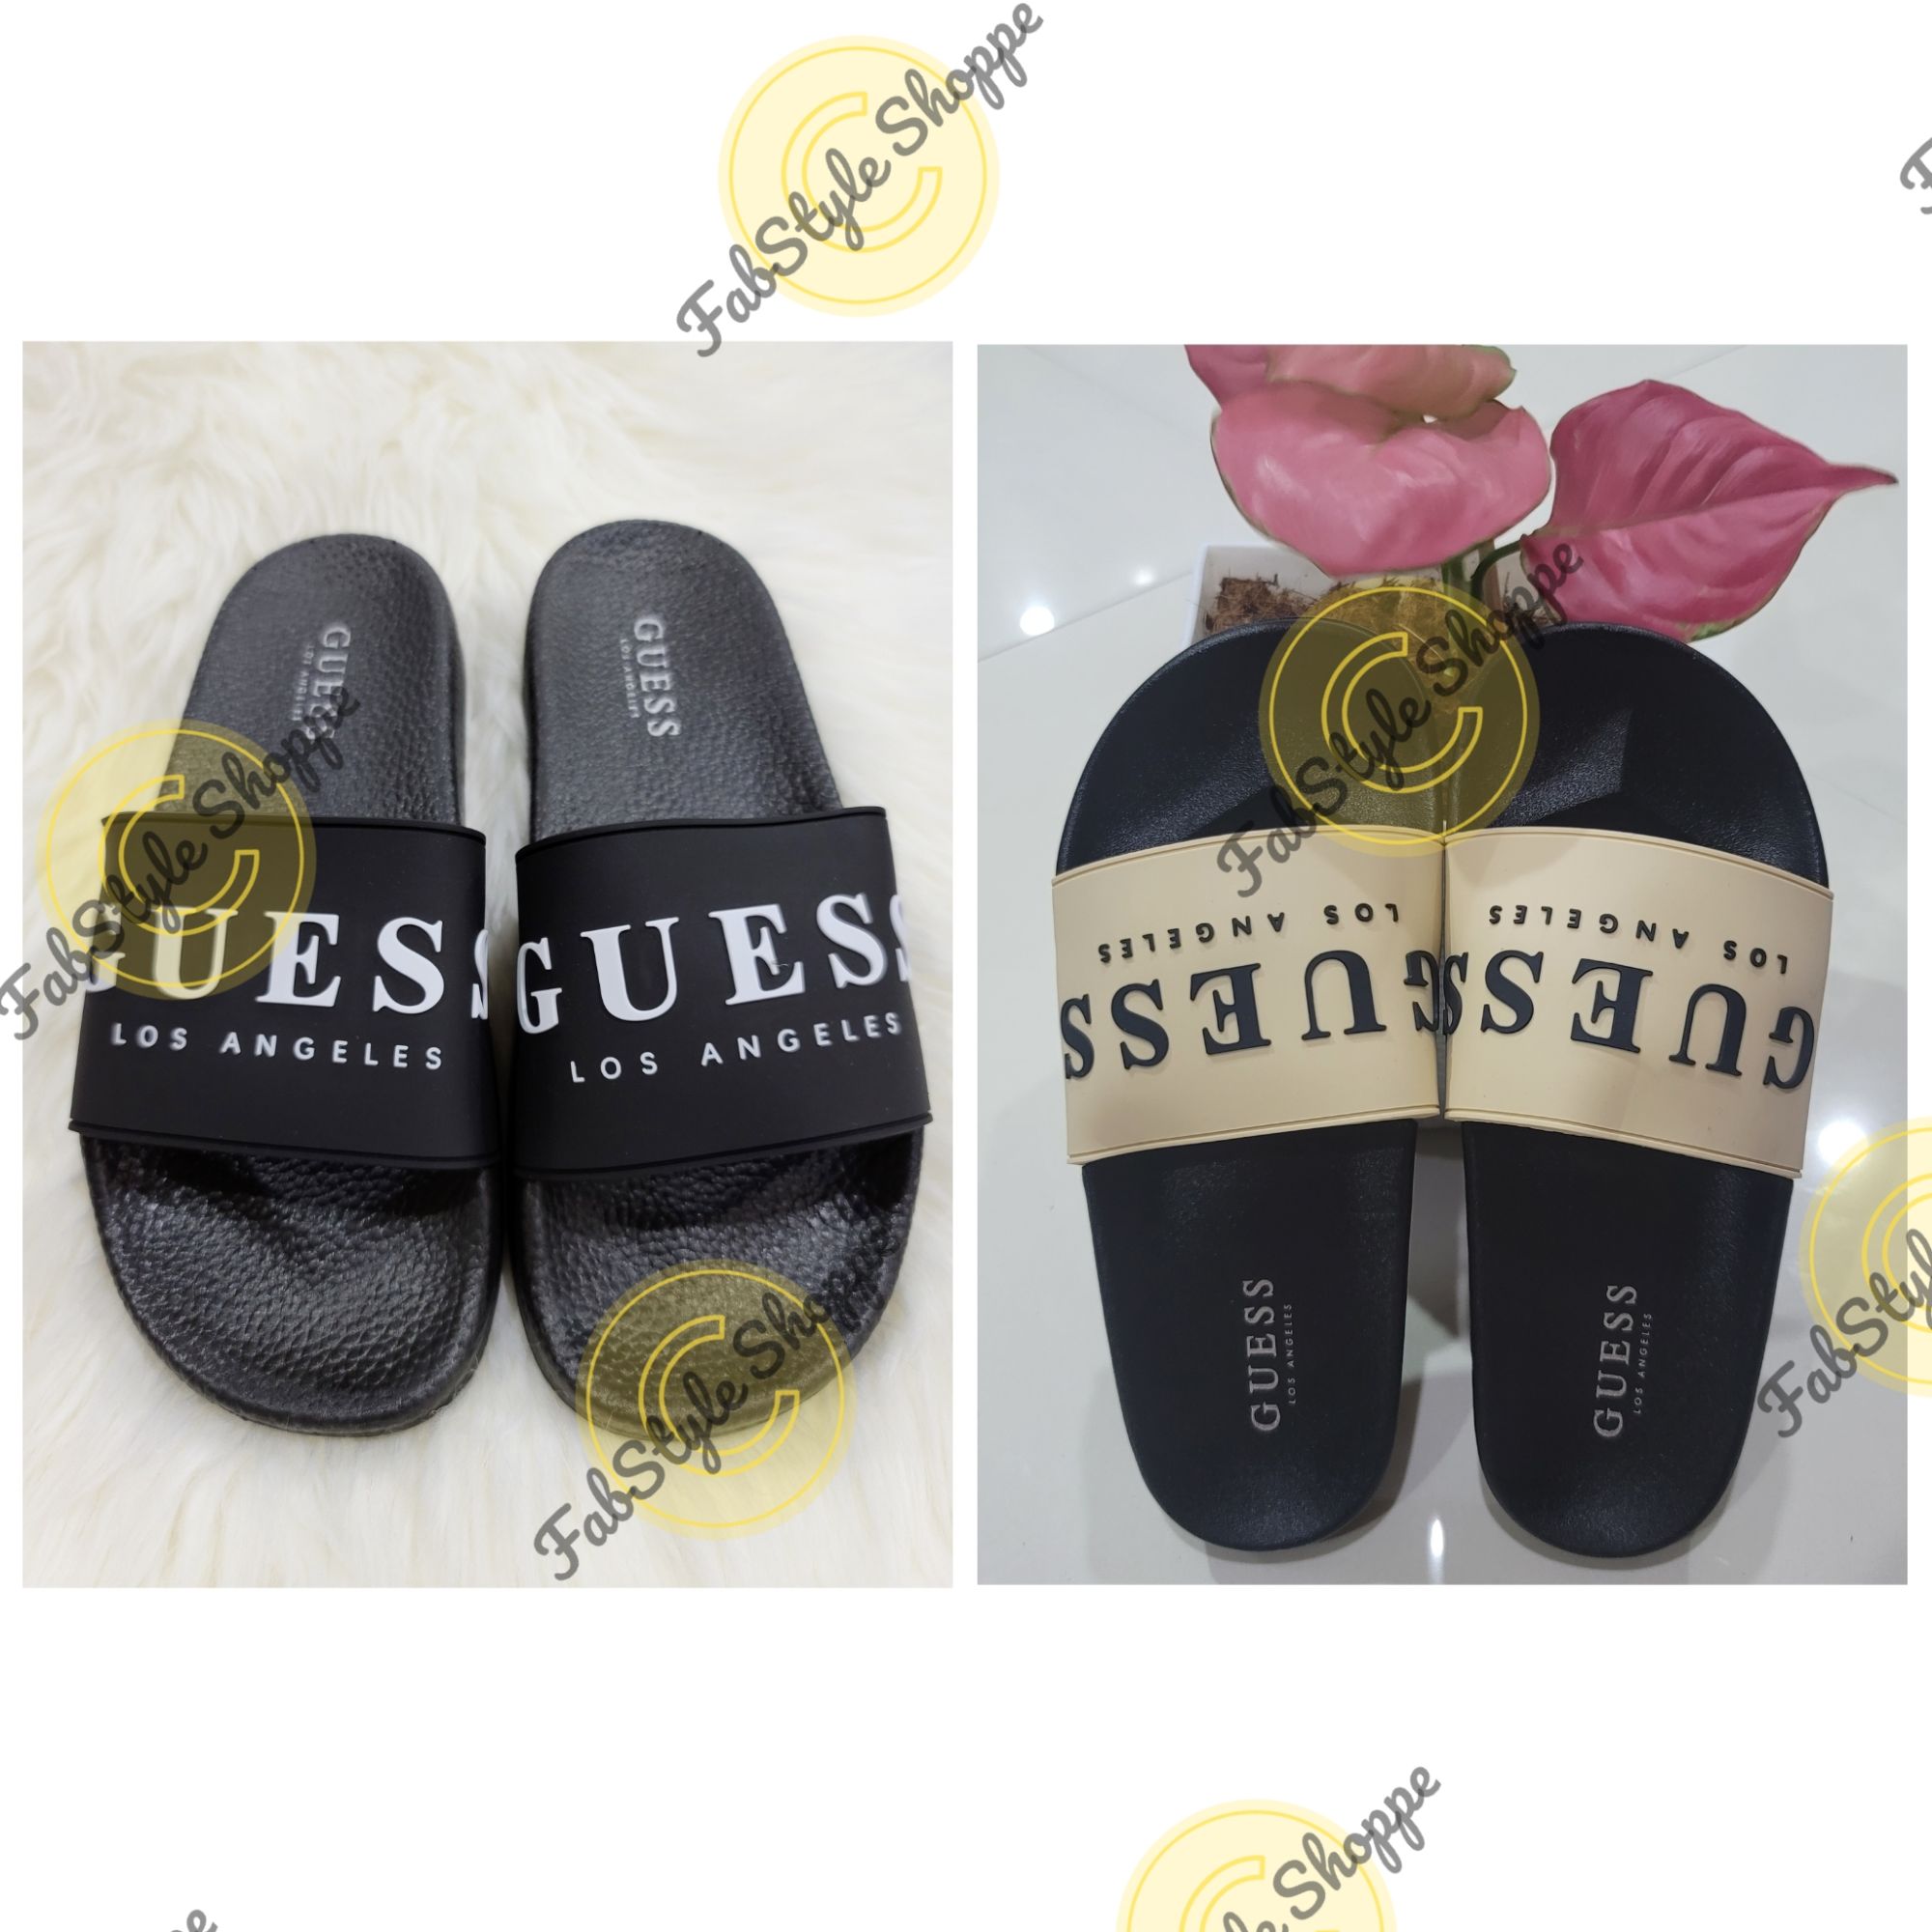 Guess women's beach slippers - black/gold | Robel.shoes